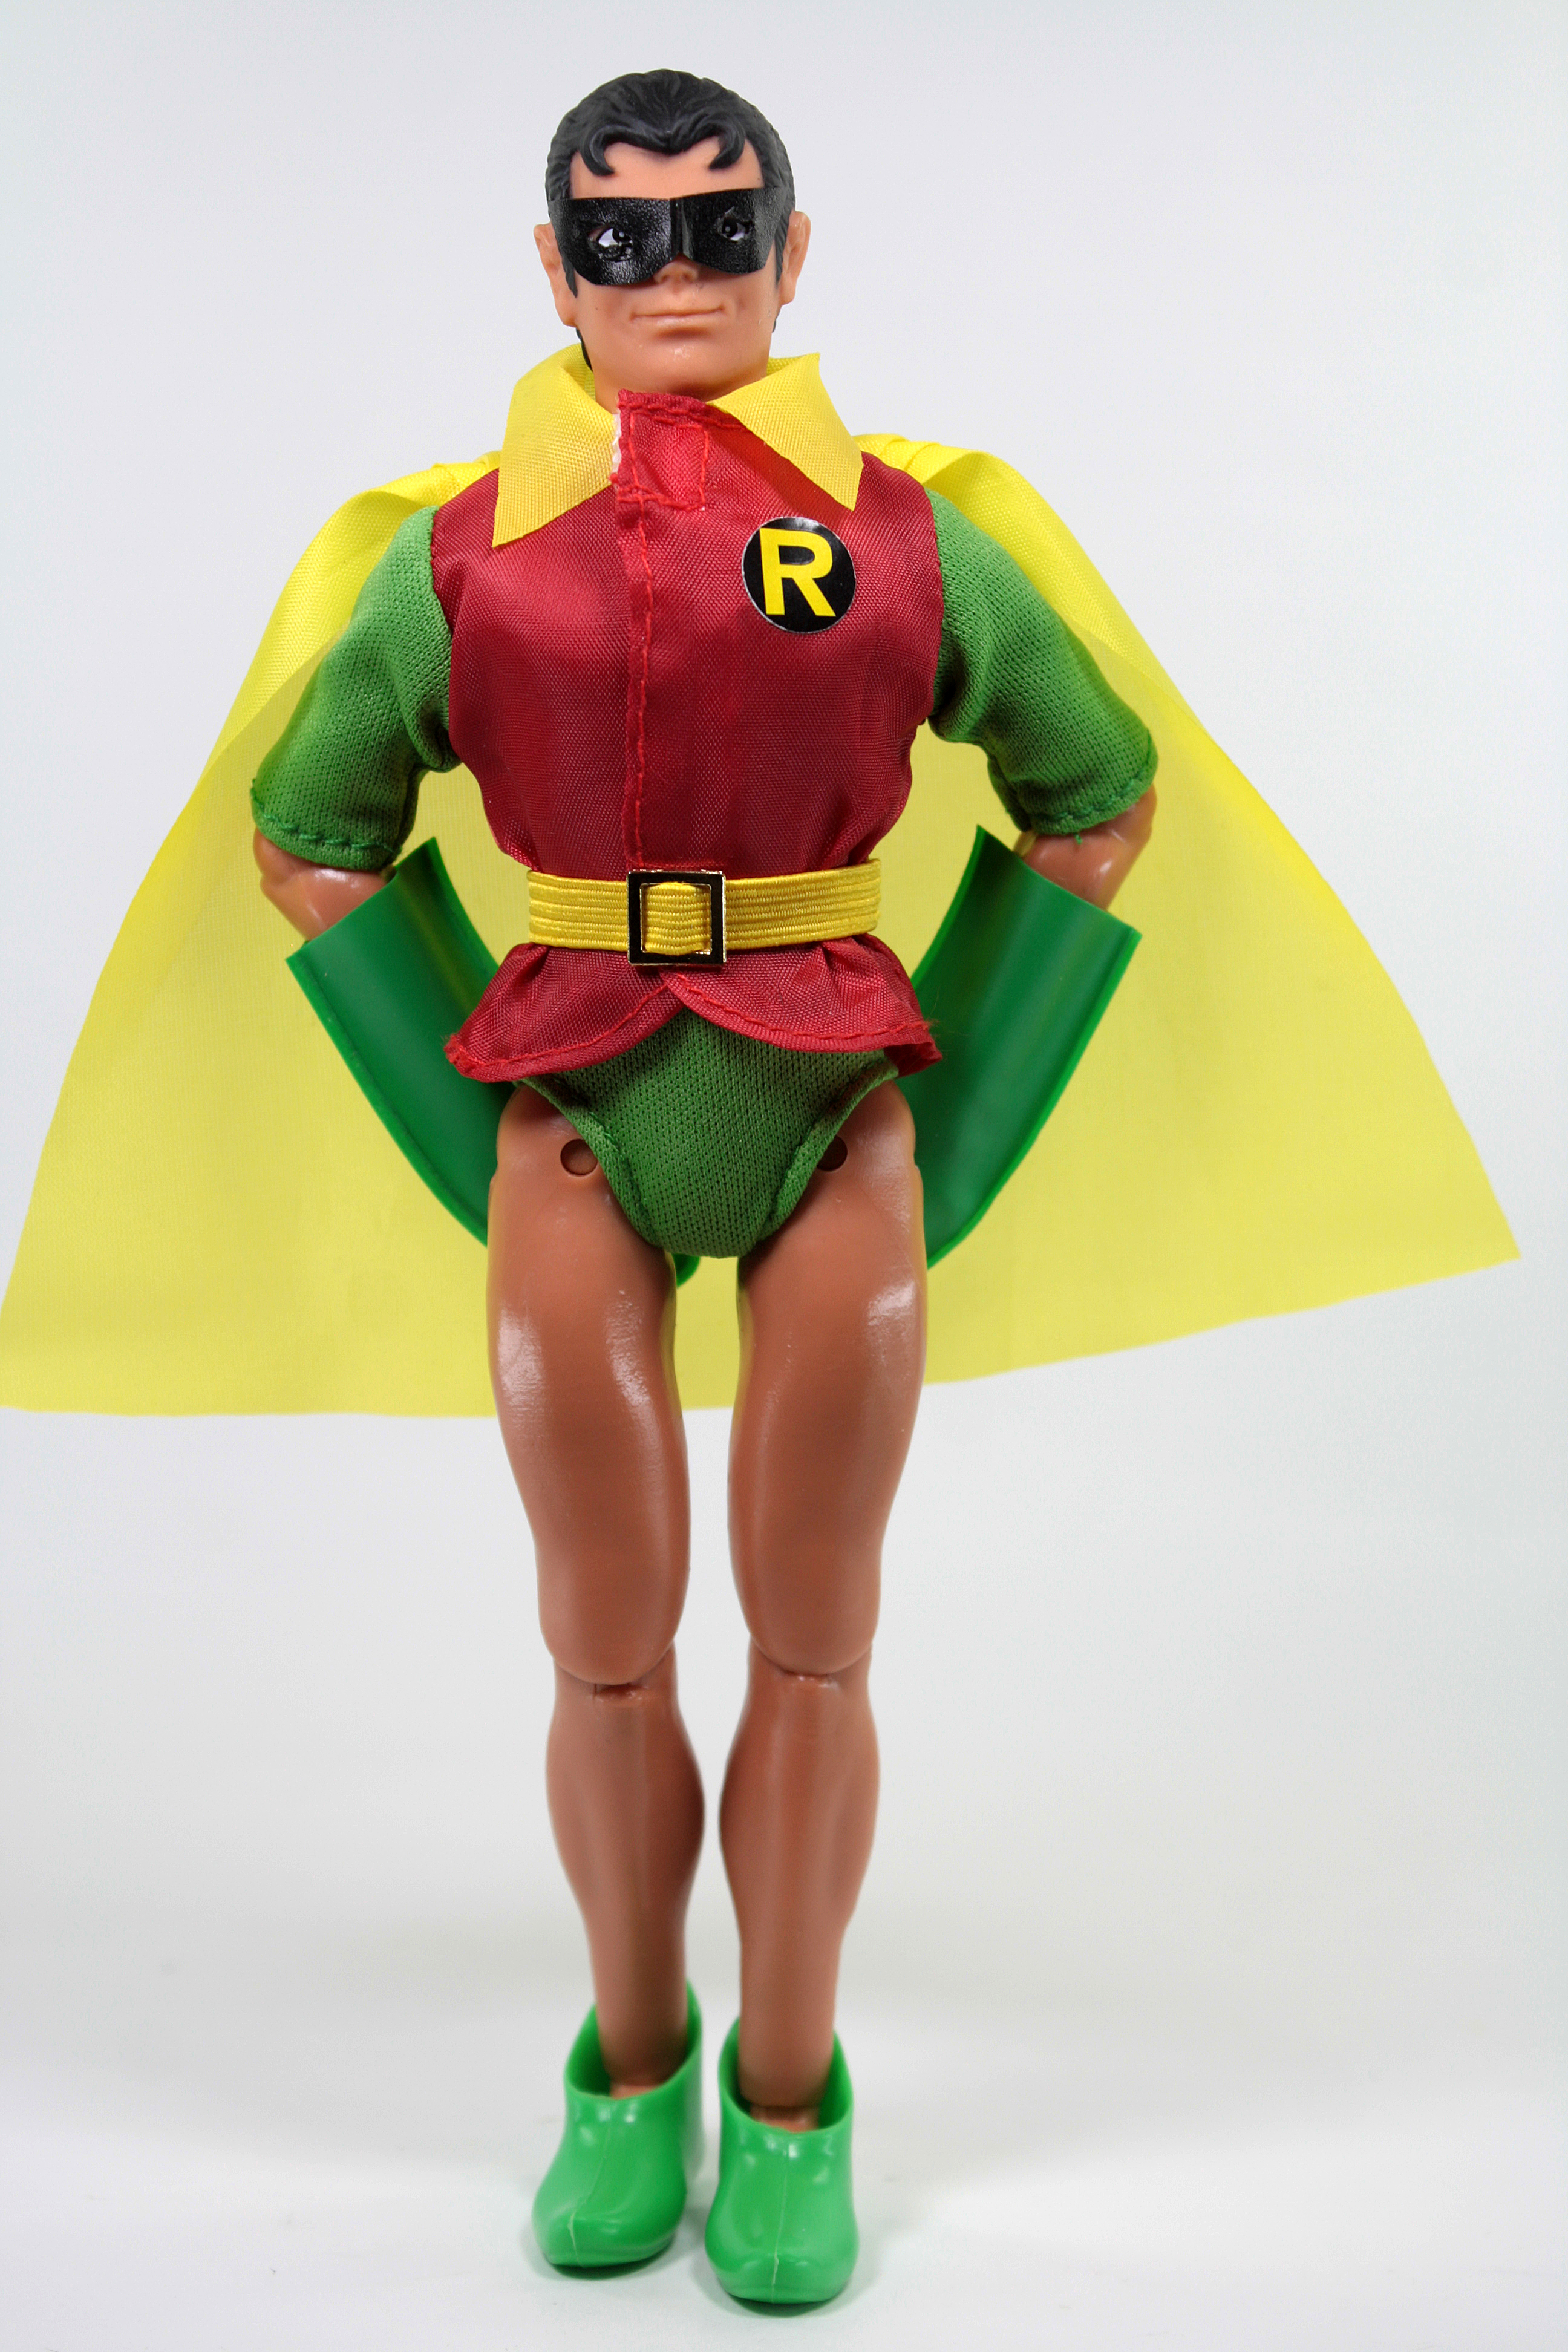 MAY229360 - MEGO DC ROBIN CLASSIC 50TH ANNIVERSARY 8IN AF